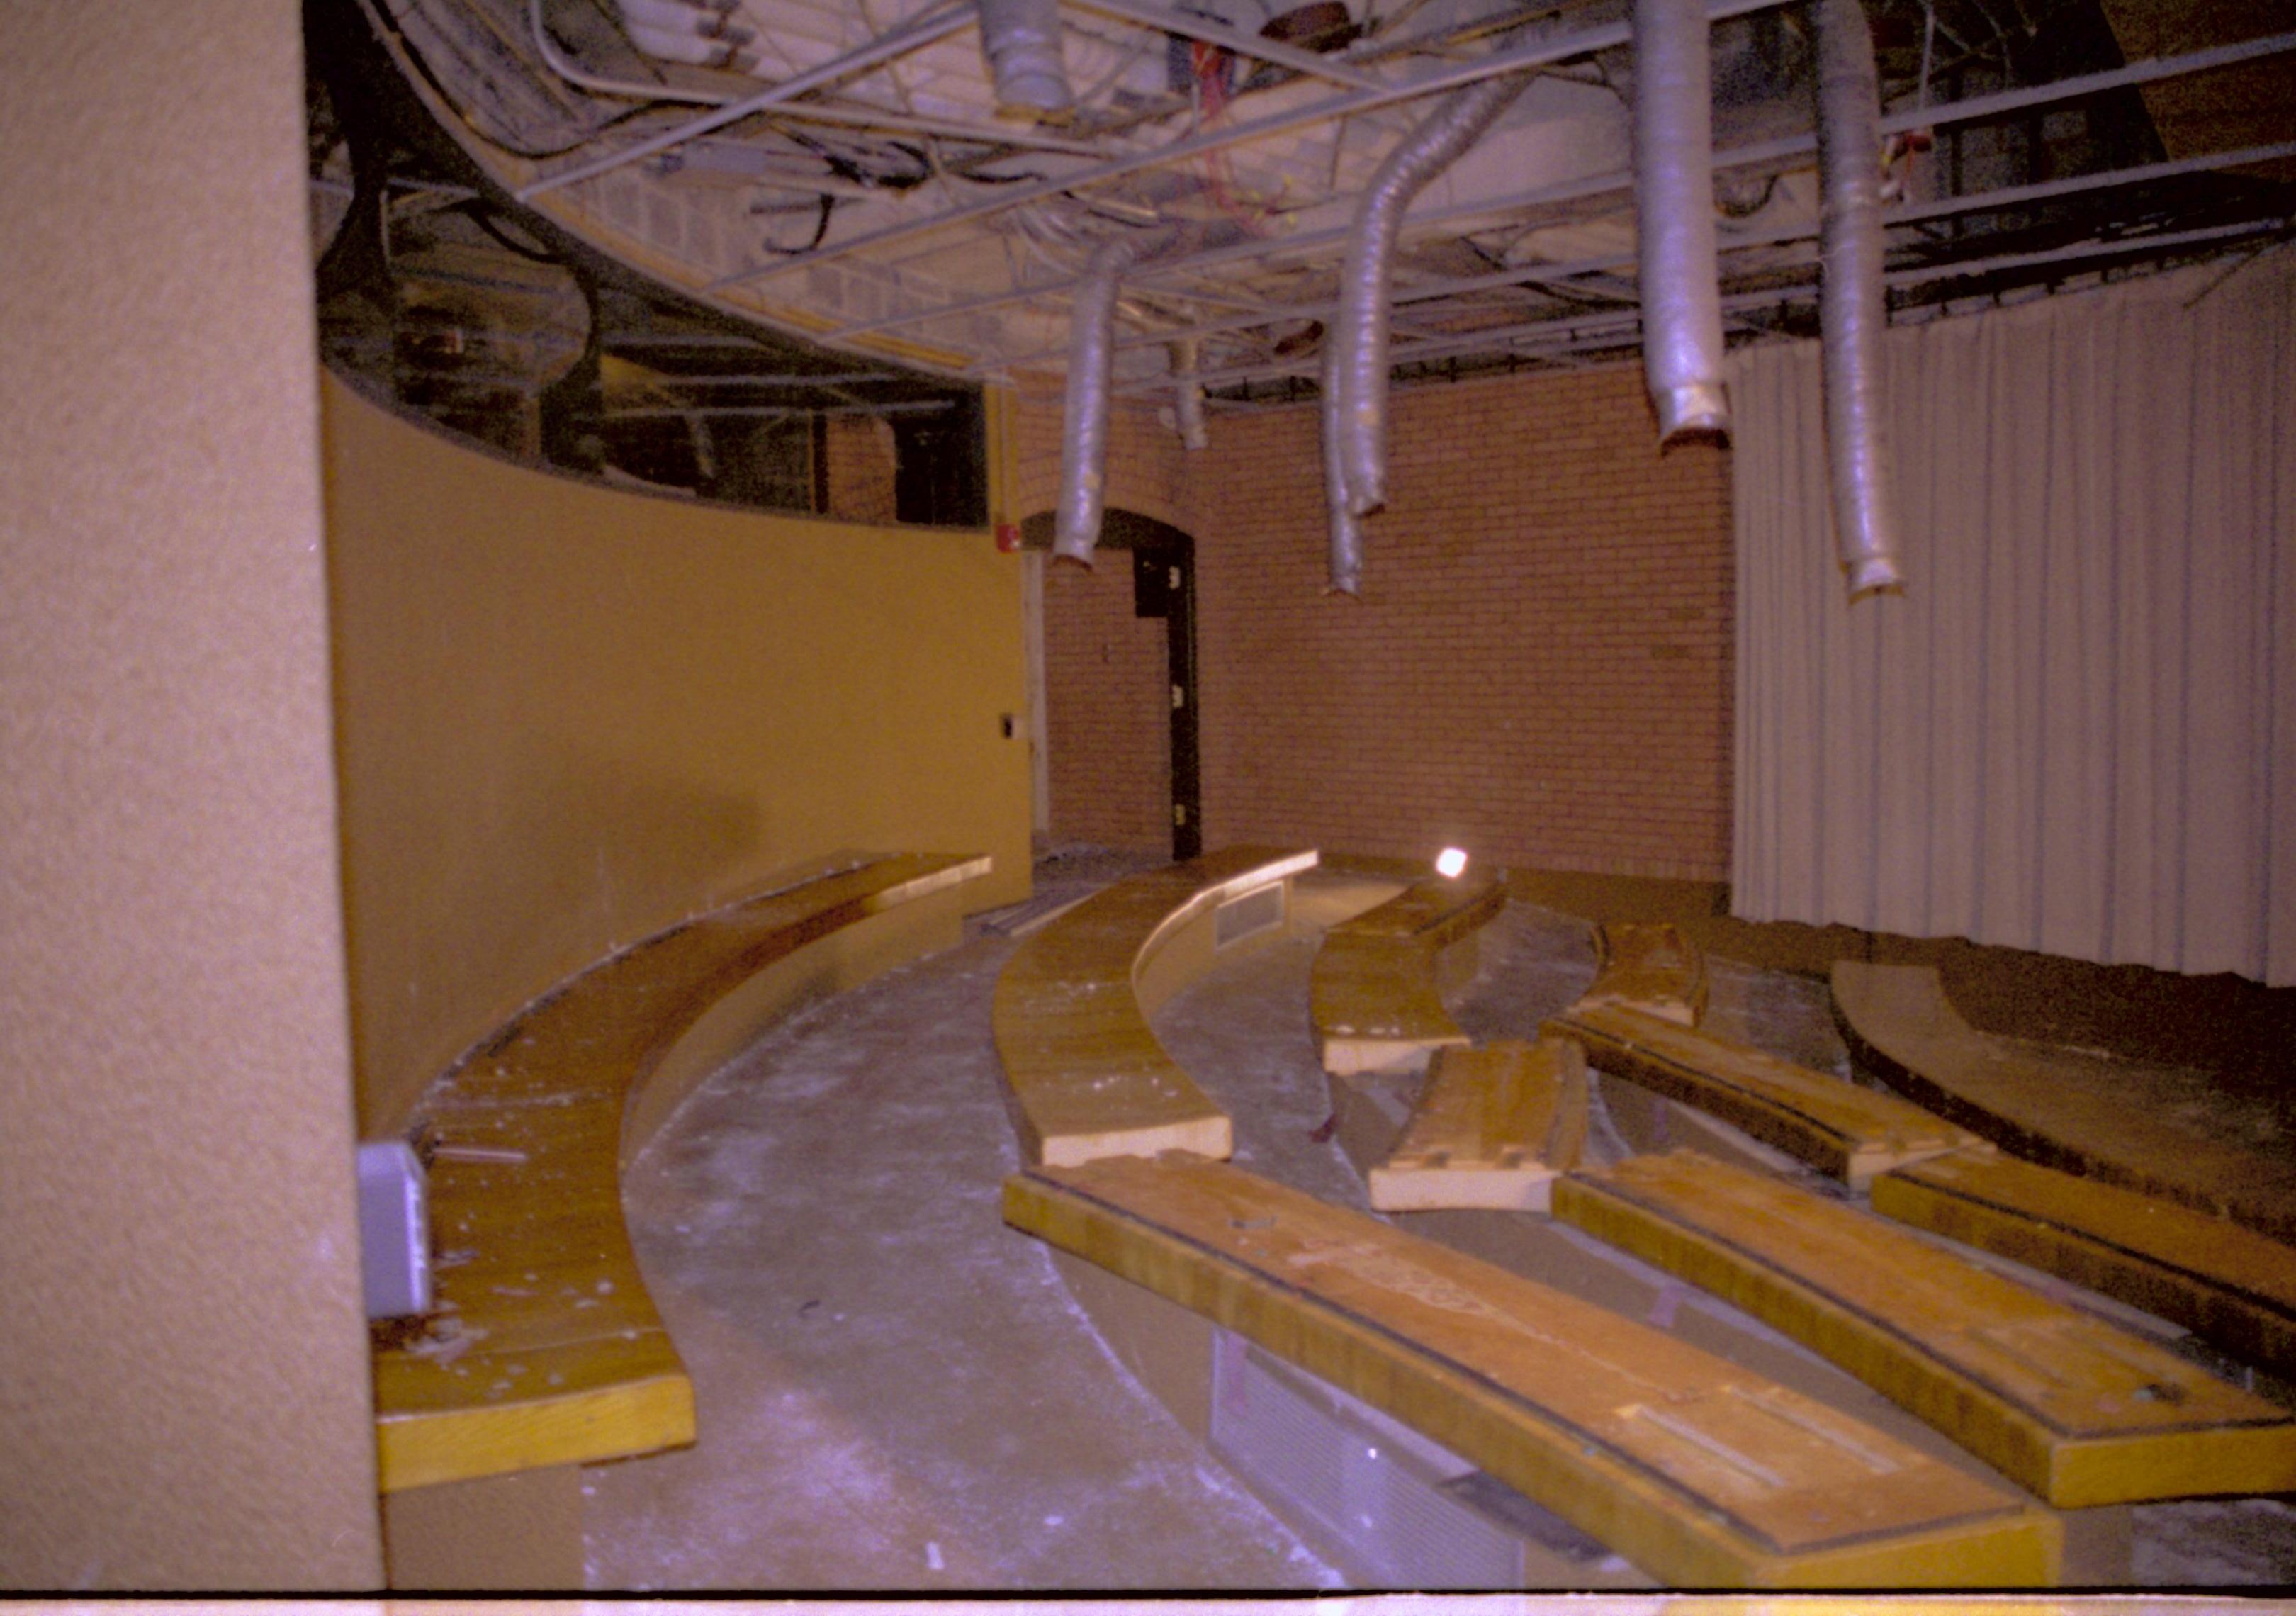 Theater 2 Lincoln Home NHS- Visitor Center remodel,  Roll 2000-8, exp 20 Visitor Center, remodel, theatre